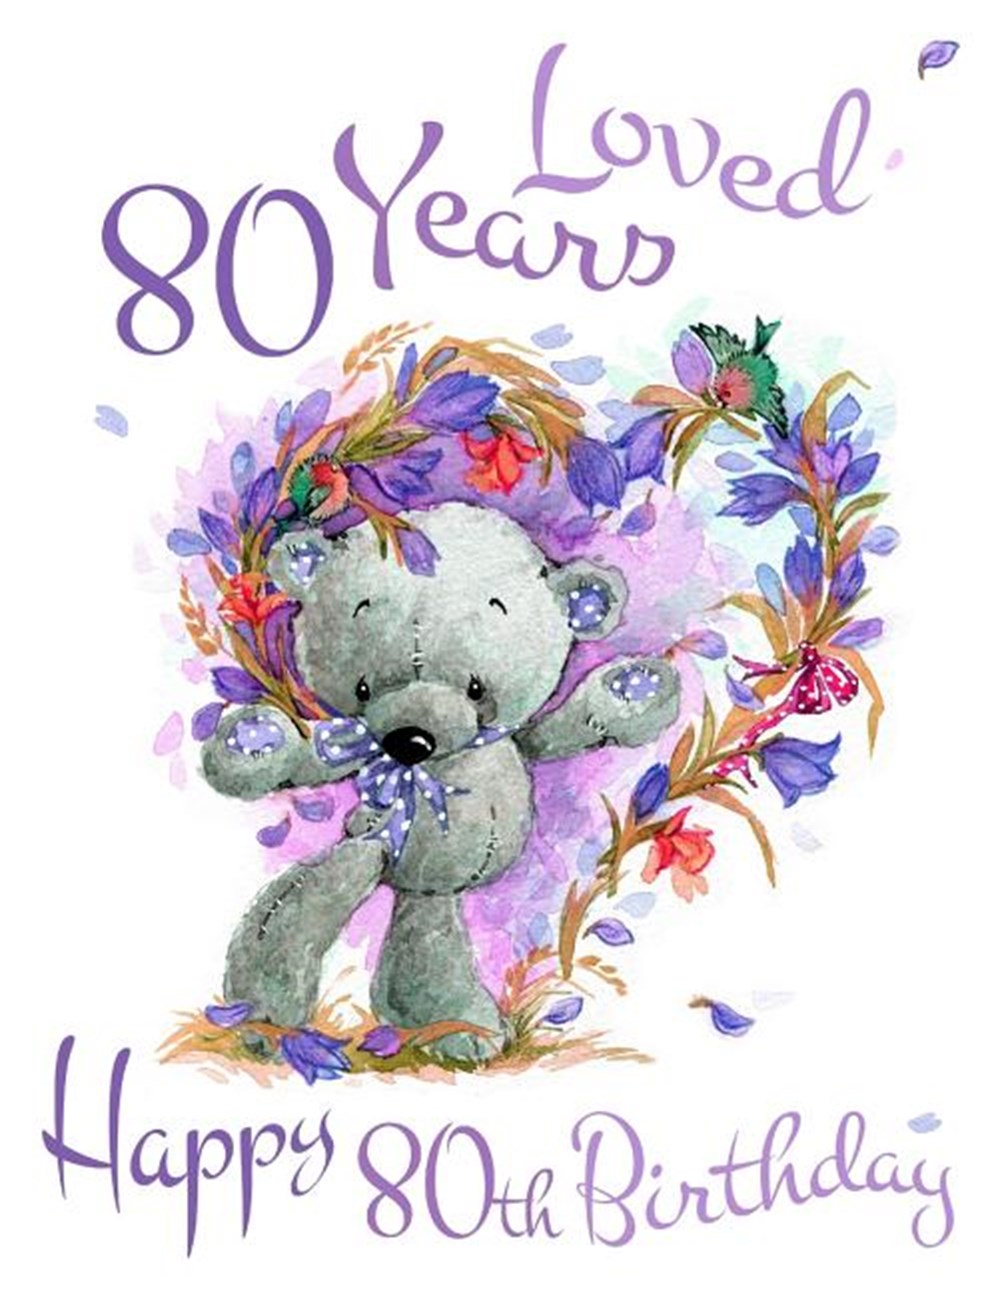 Happy 80th Birthday Large Print Address Book with Pretty Unicorn Design. Forget the Birthday Card an